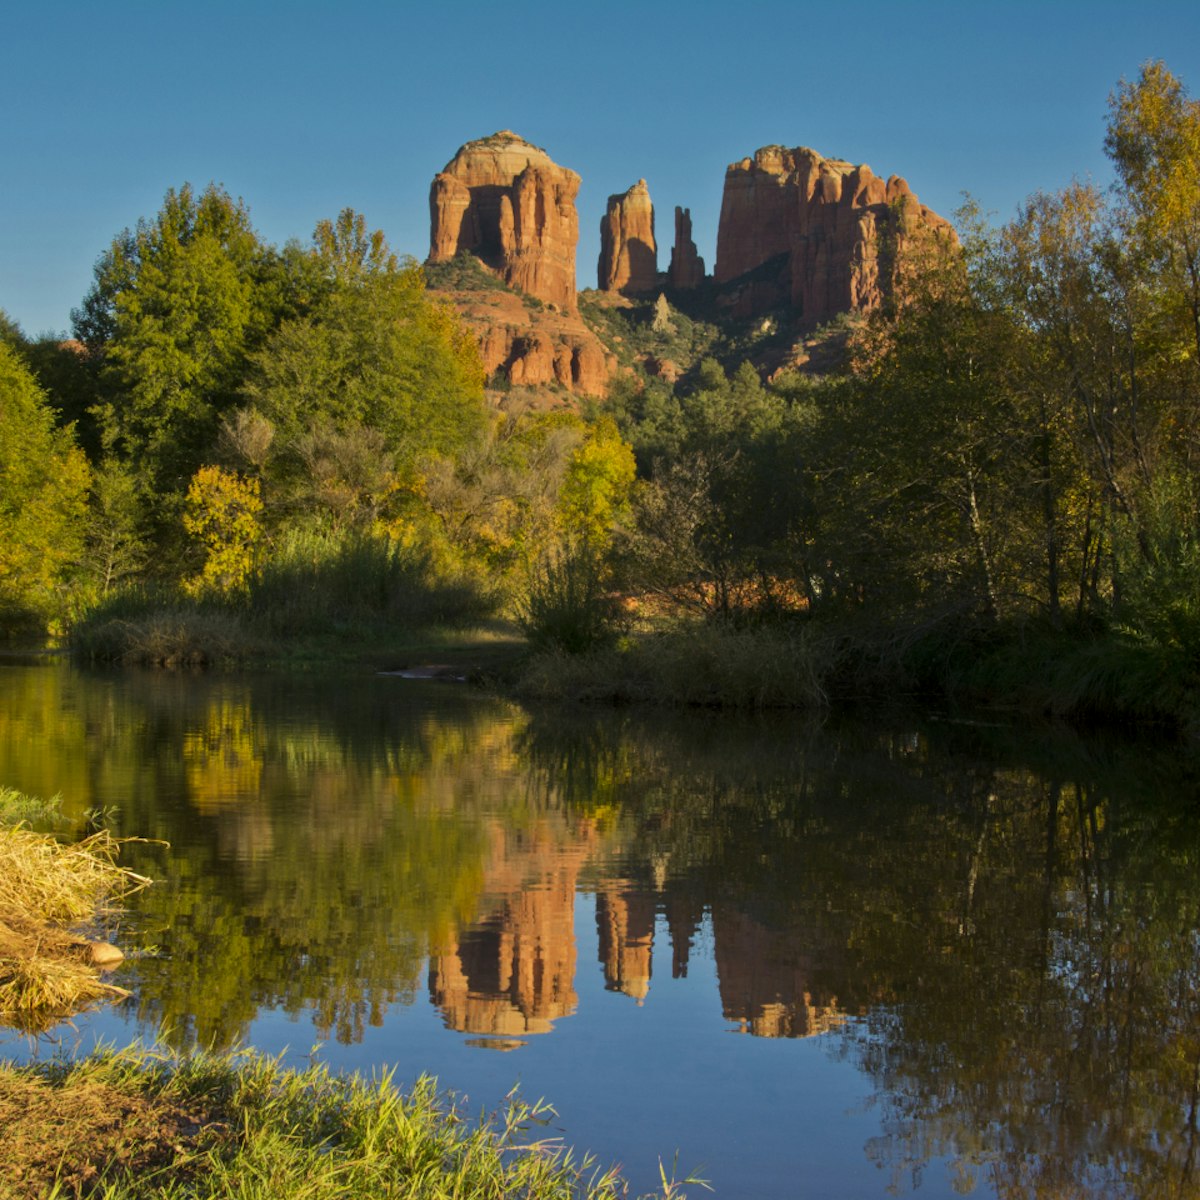 The Crescent Moon Ranch Picnic Area at Red Rock Crossing is one of the most photographed scenes in the southwest, towering Cathedral Rock reflected in the waters of Oak Creek at Red Rock Crossing. The picnic area located at that same site is as popular as it is beautiful.